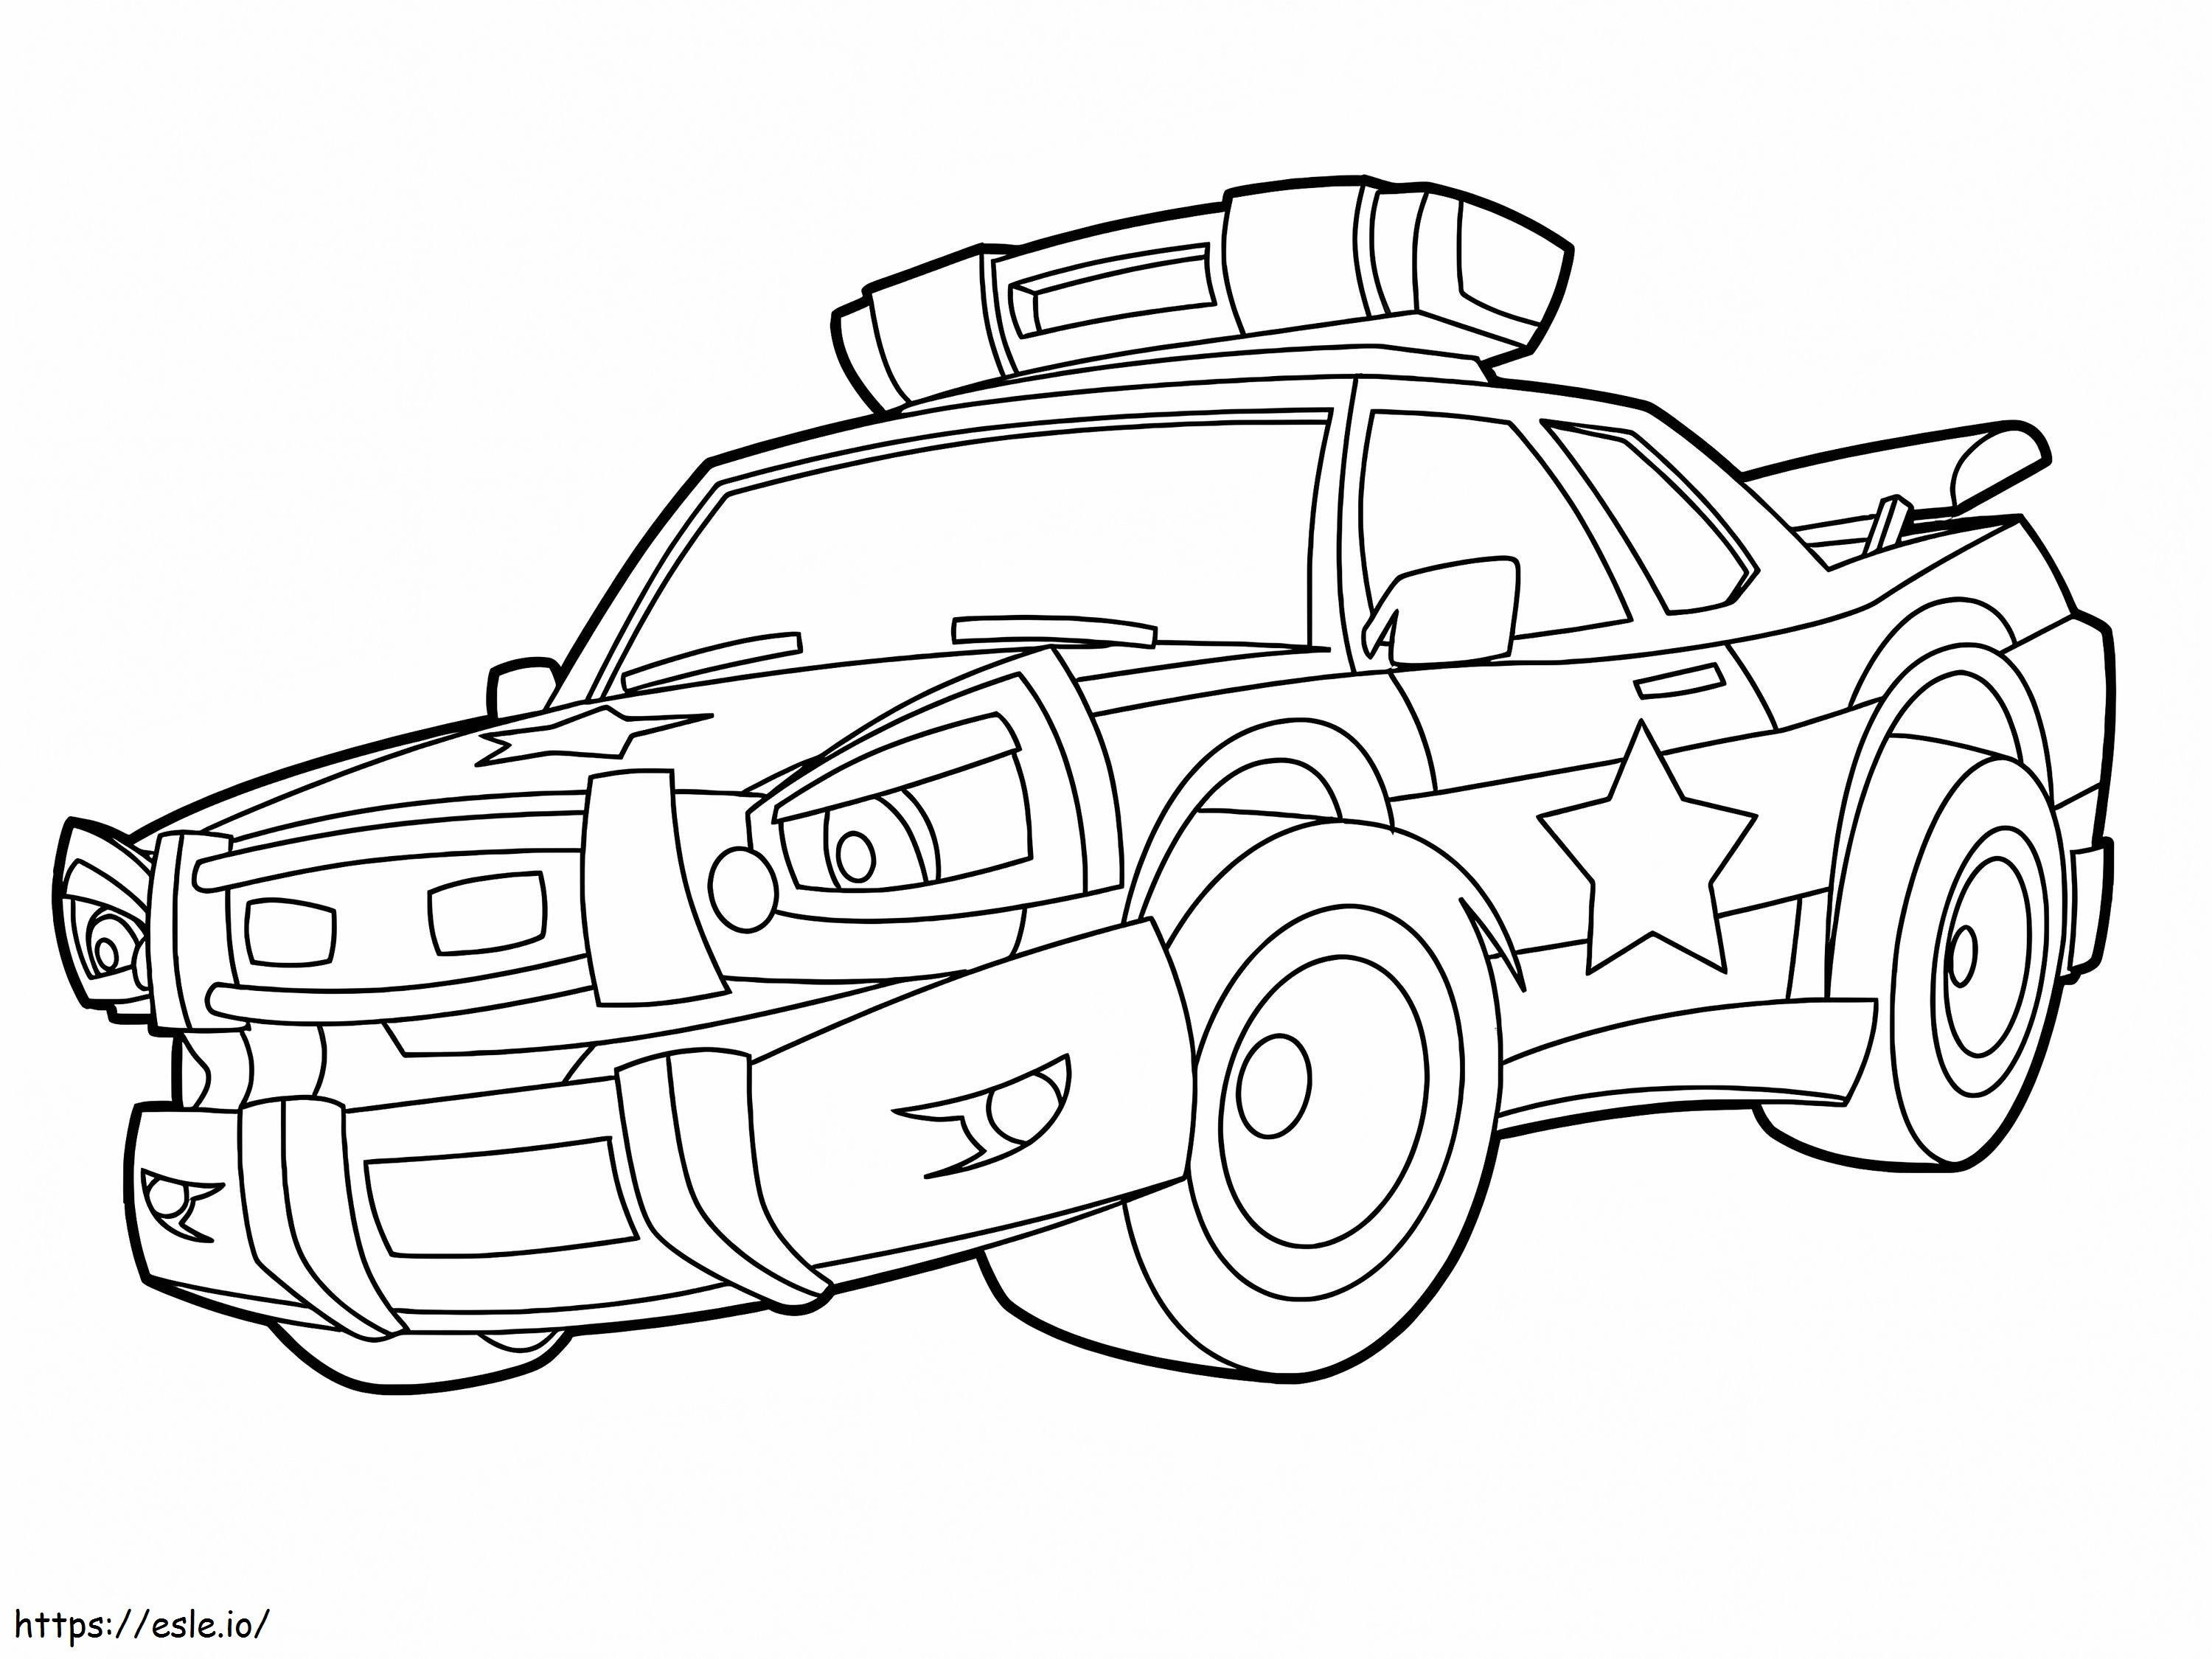 Animated Police Car coloring page